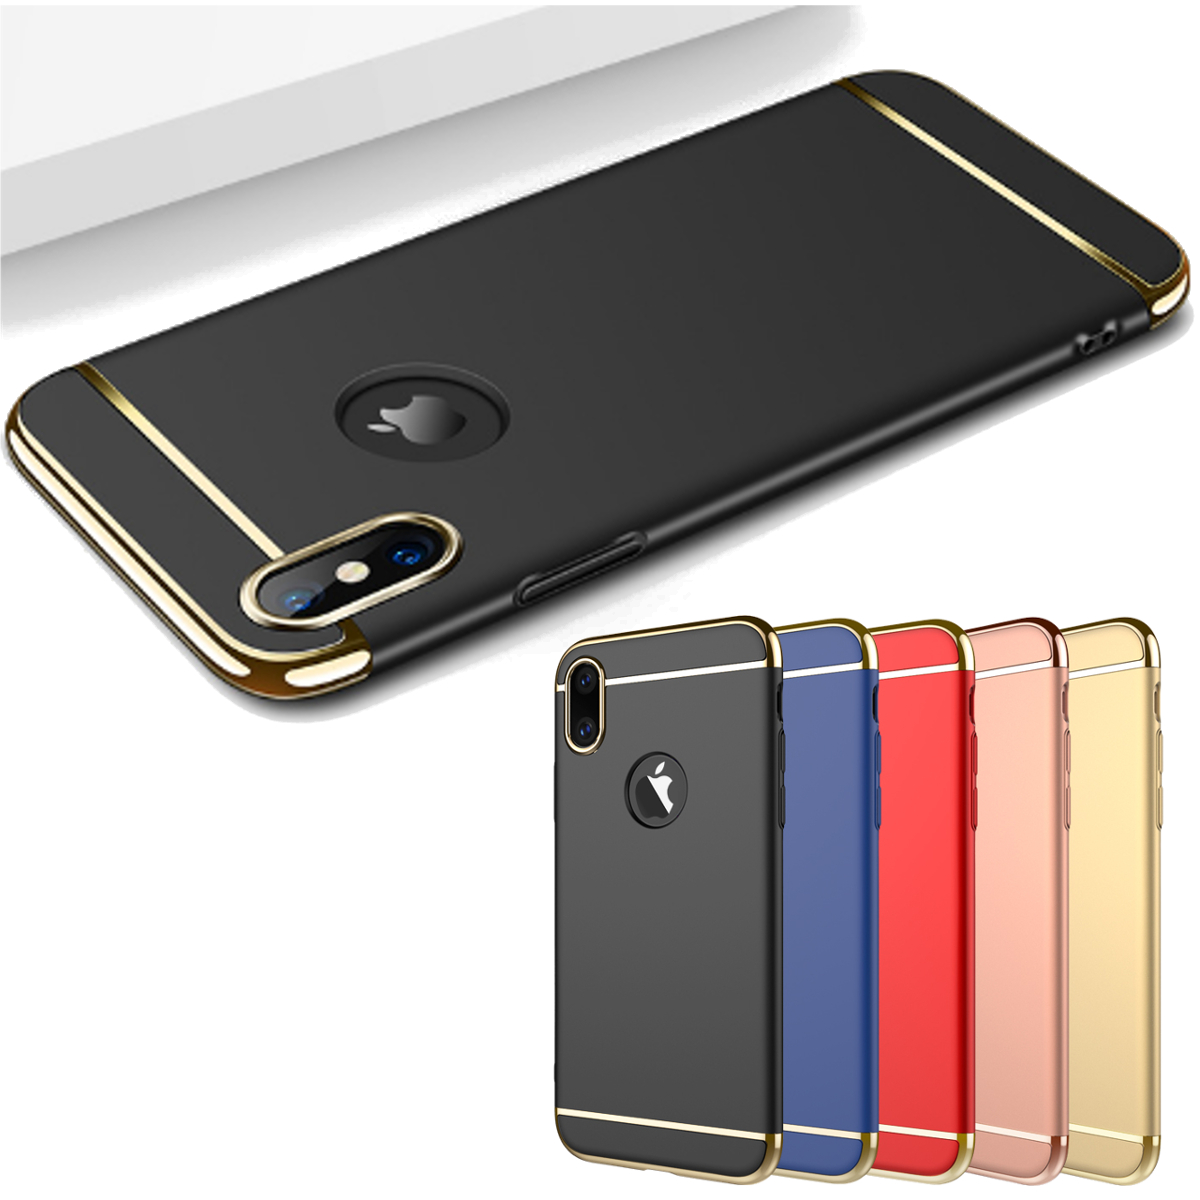 3-In-1-Plating-Anti-Fingerprint-Acrylic-PC-Case-Cover-for-iPhone-X-1229123-5